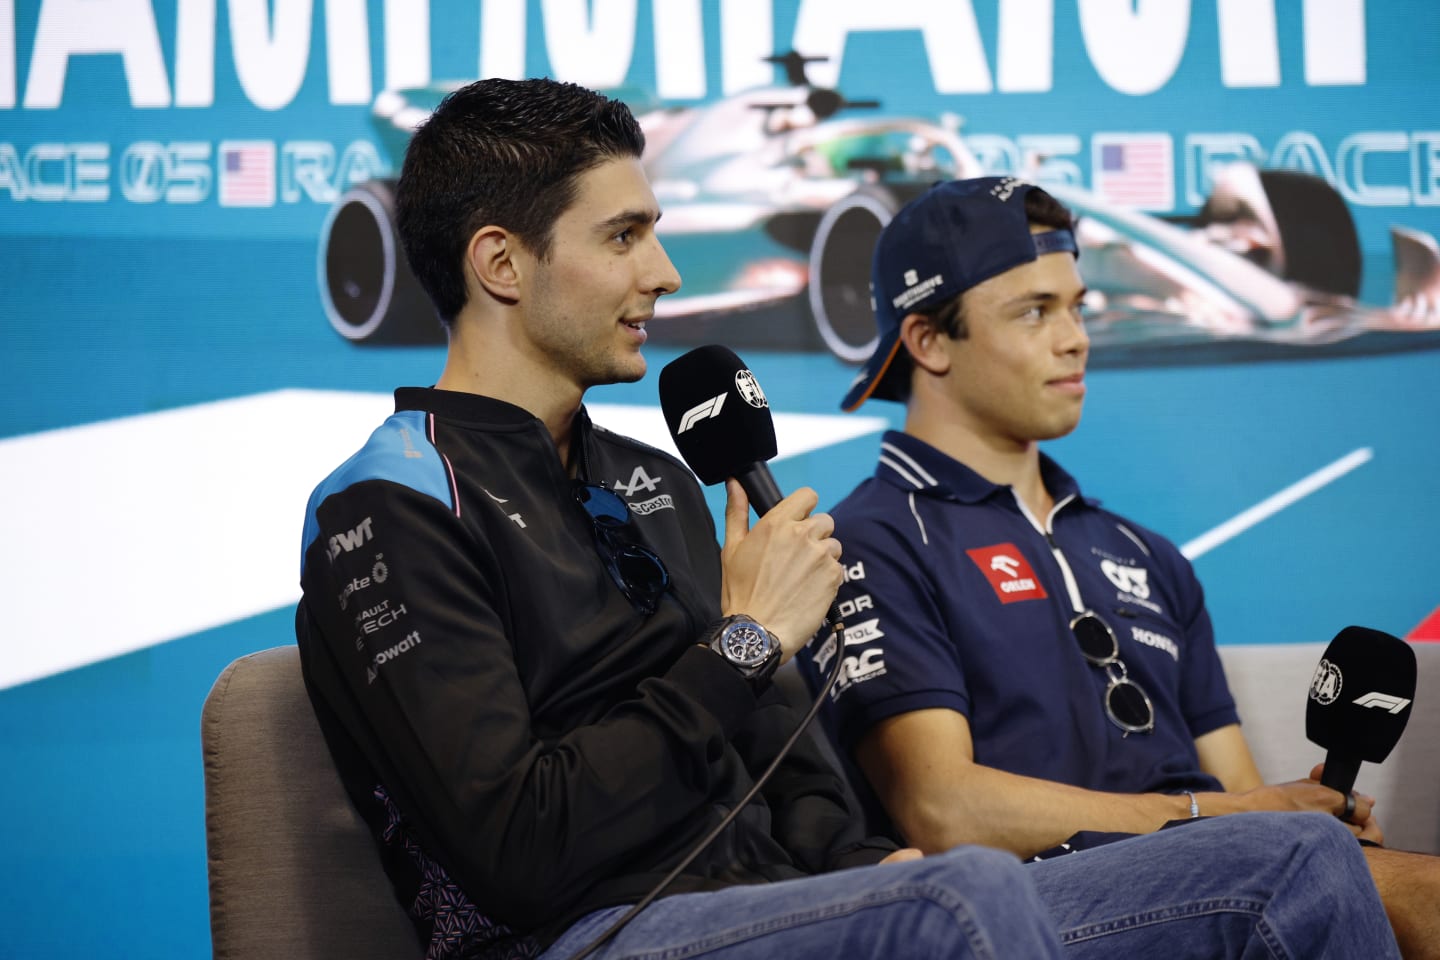 MIAMI, FLORIDA - MAY 04: Esteban Ocon of France and Alpine F1 talks in the Drivers Press Conference during previews ahead of the F1 Grand Prix of Miami at Miami International Autodrome on May 04, 2023 in Miami, Florida. (Photo by Jared C. Tilton/Getty Images)